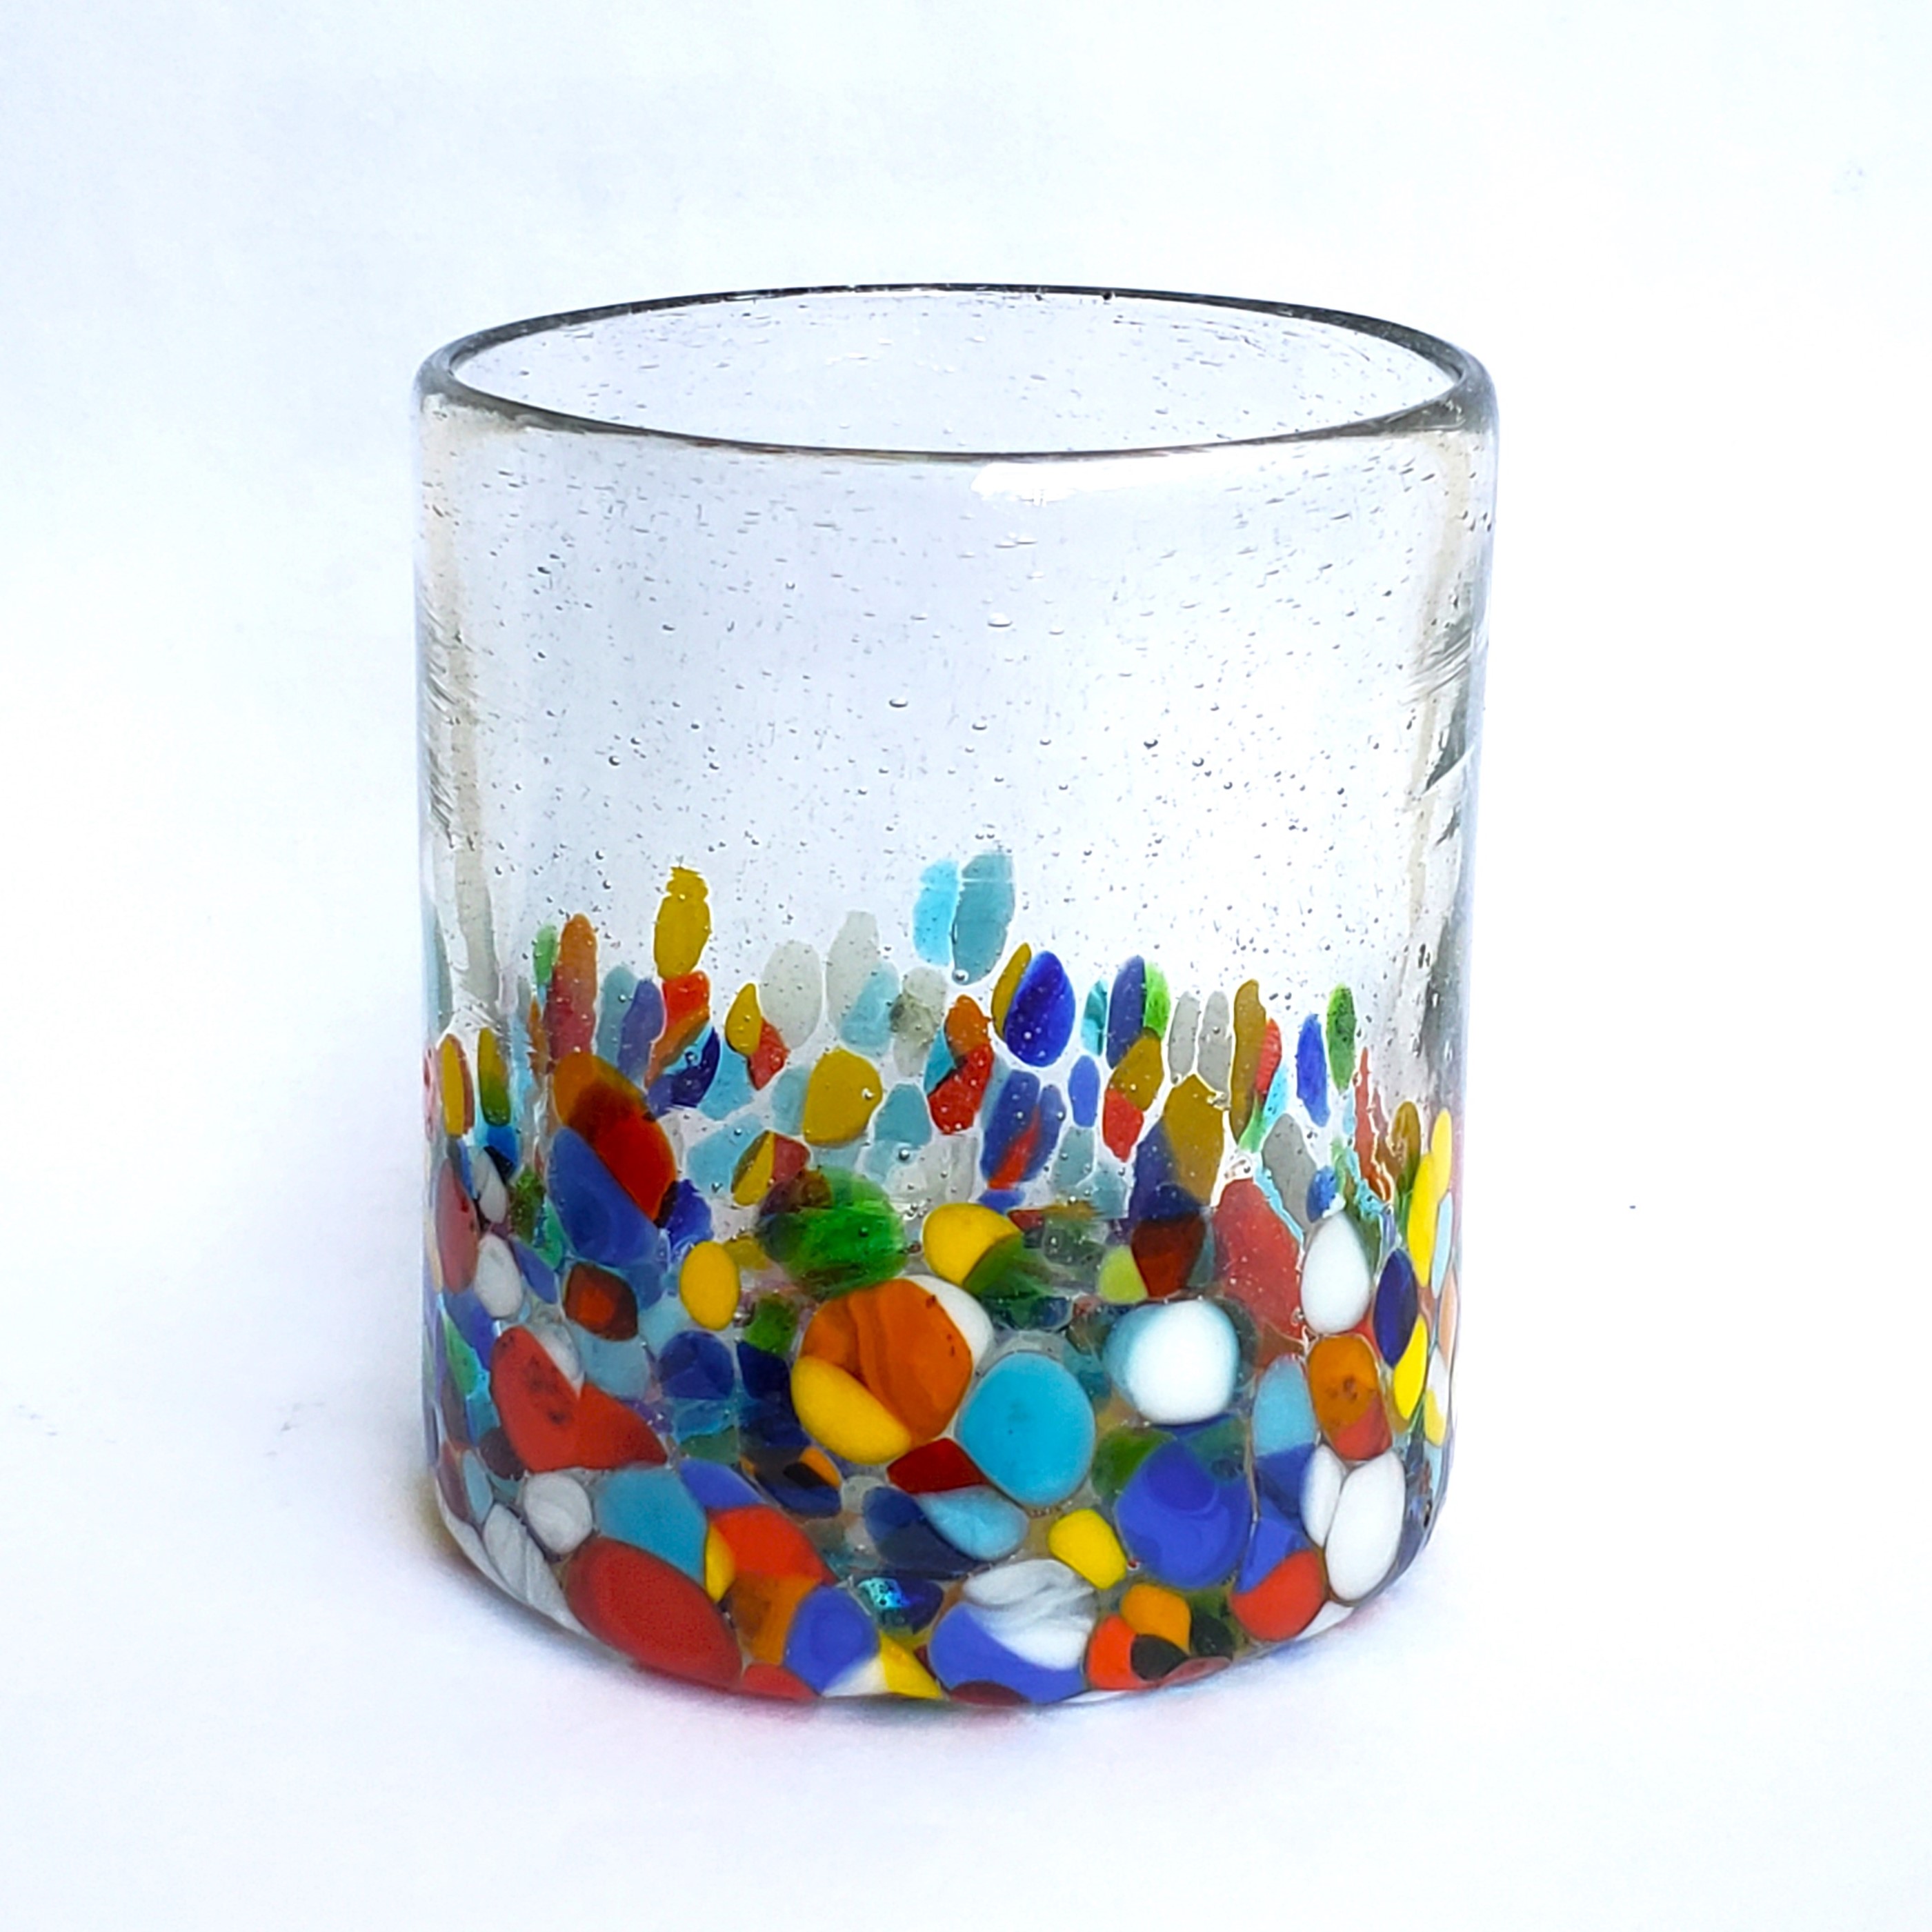 Wholesale MEXICAN GLASSWARE / Clear & Confetti 9 oz Short Tumblers  / Our Clear & Confetti Glassware combines  the best of two worlds: clear, thick, sturdy handcrafted glass on top, meets the colorful, festive, confetti bottom! These glasses will sure be a standout in any table setting or as a fabulous gift for your loved ones. Crafted one by one by skilled artisans in Tonala, Mexico, each glass is different from the next making them unique works of art. You'll be amazed at how they make having a simple glass of water a happier experience. Made from eco-friendly recycled glass.